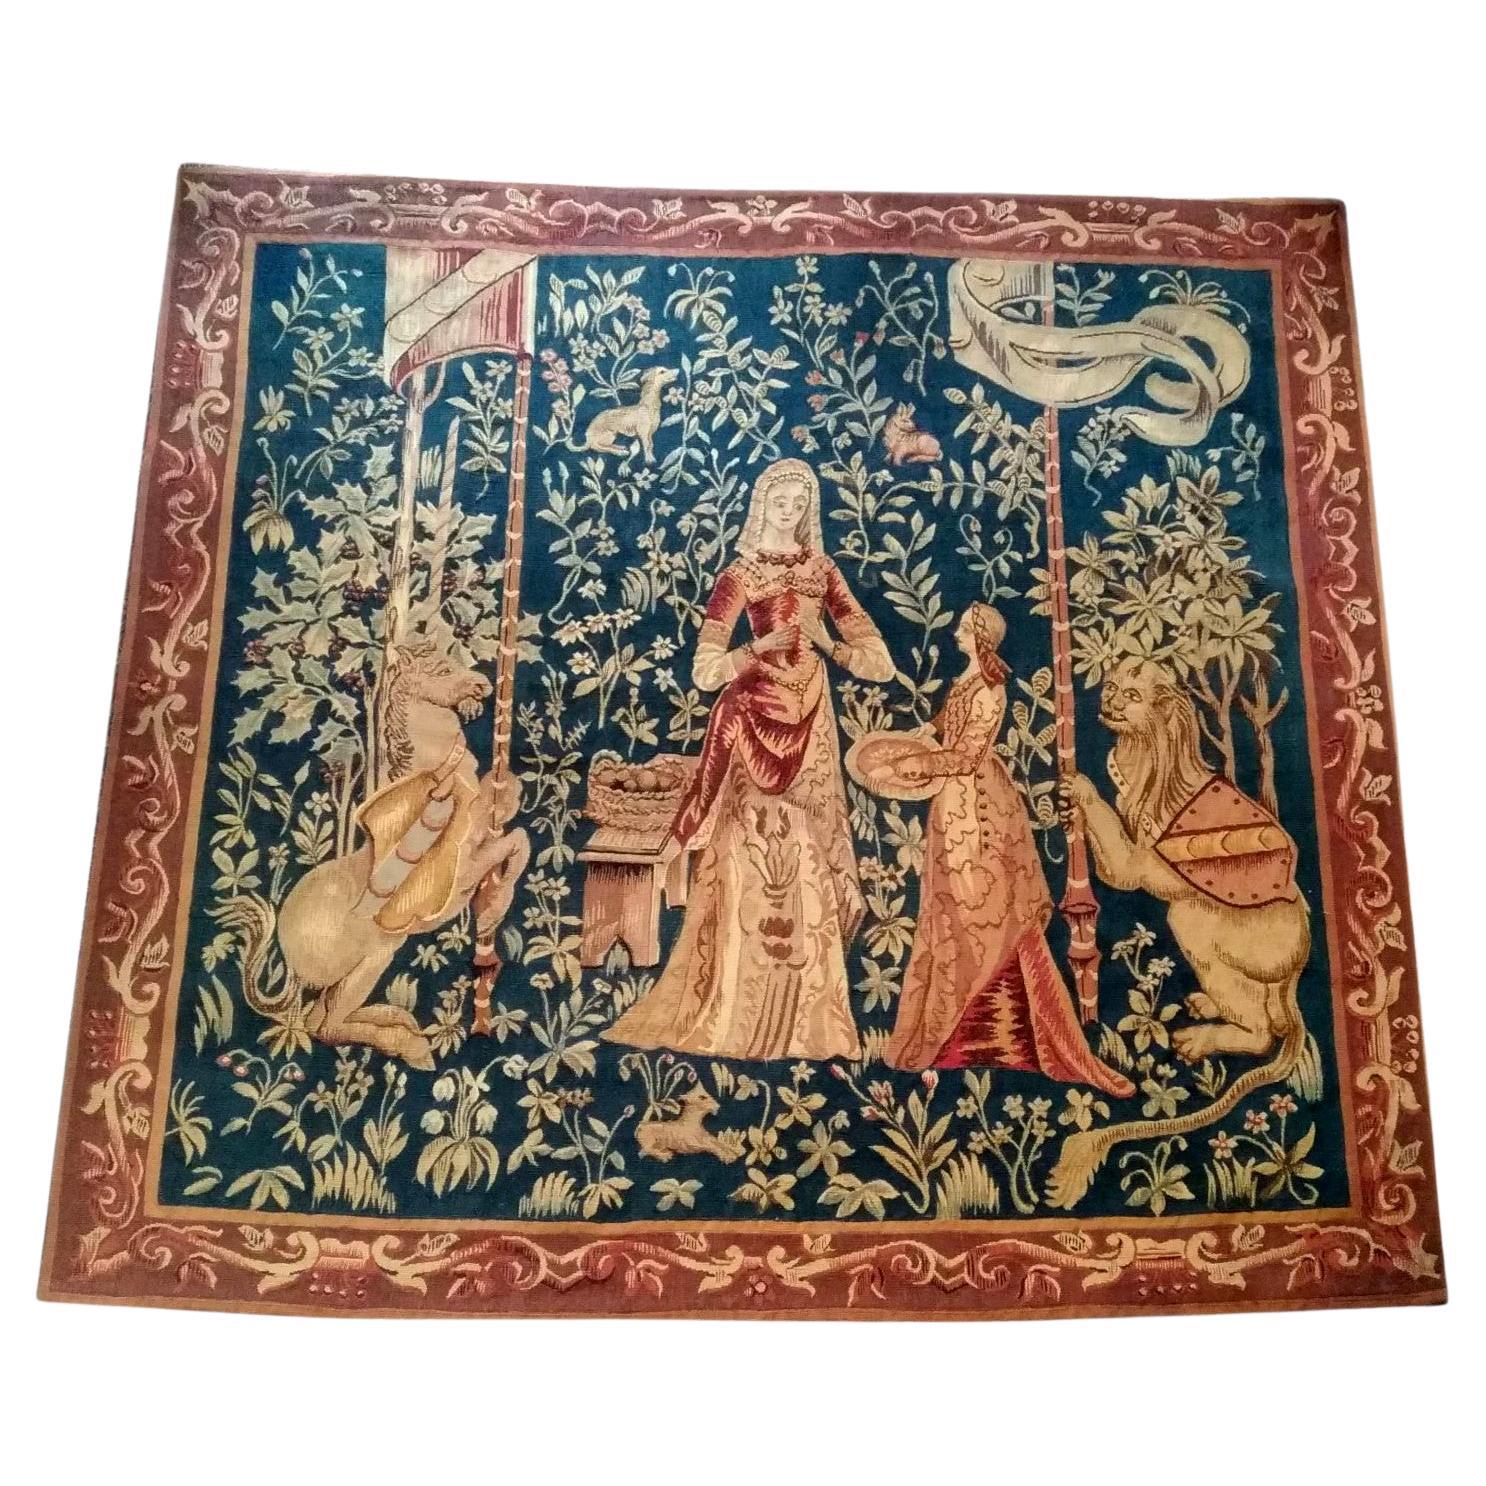  1107 - Aubusson Tapestry 19th Century Lady with the Unicorn 